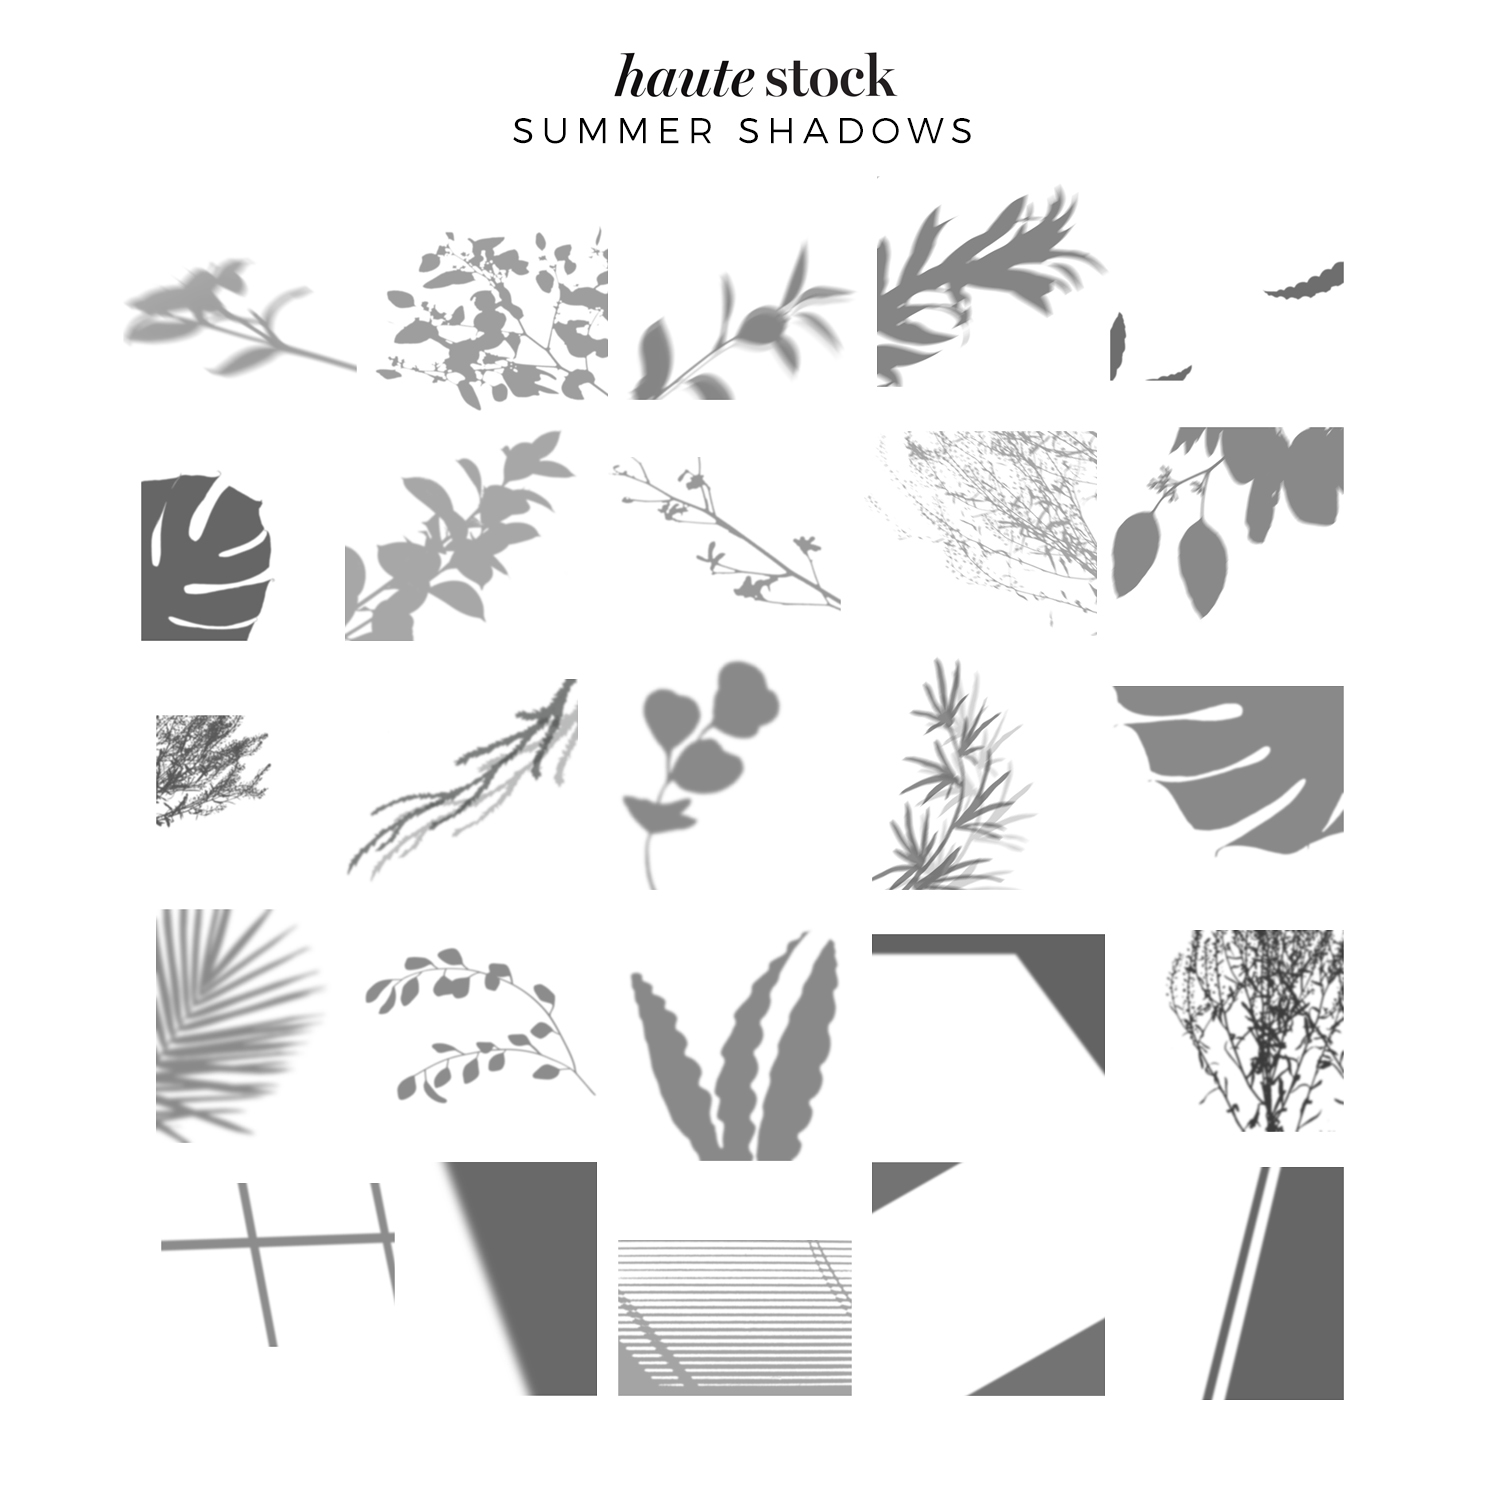 Botanical & abstract shadow overlays for mood-setting graphics for your brand from Haute Stock! Click to see a design tutorial on how to use these graphics in your own designs!